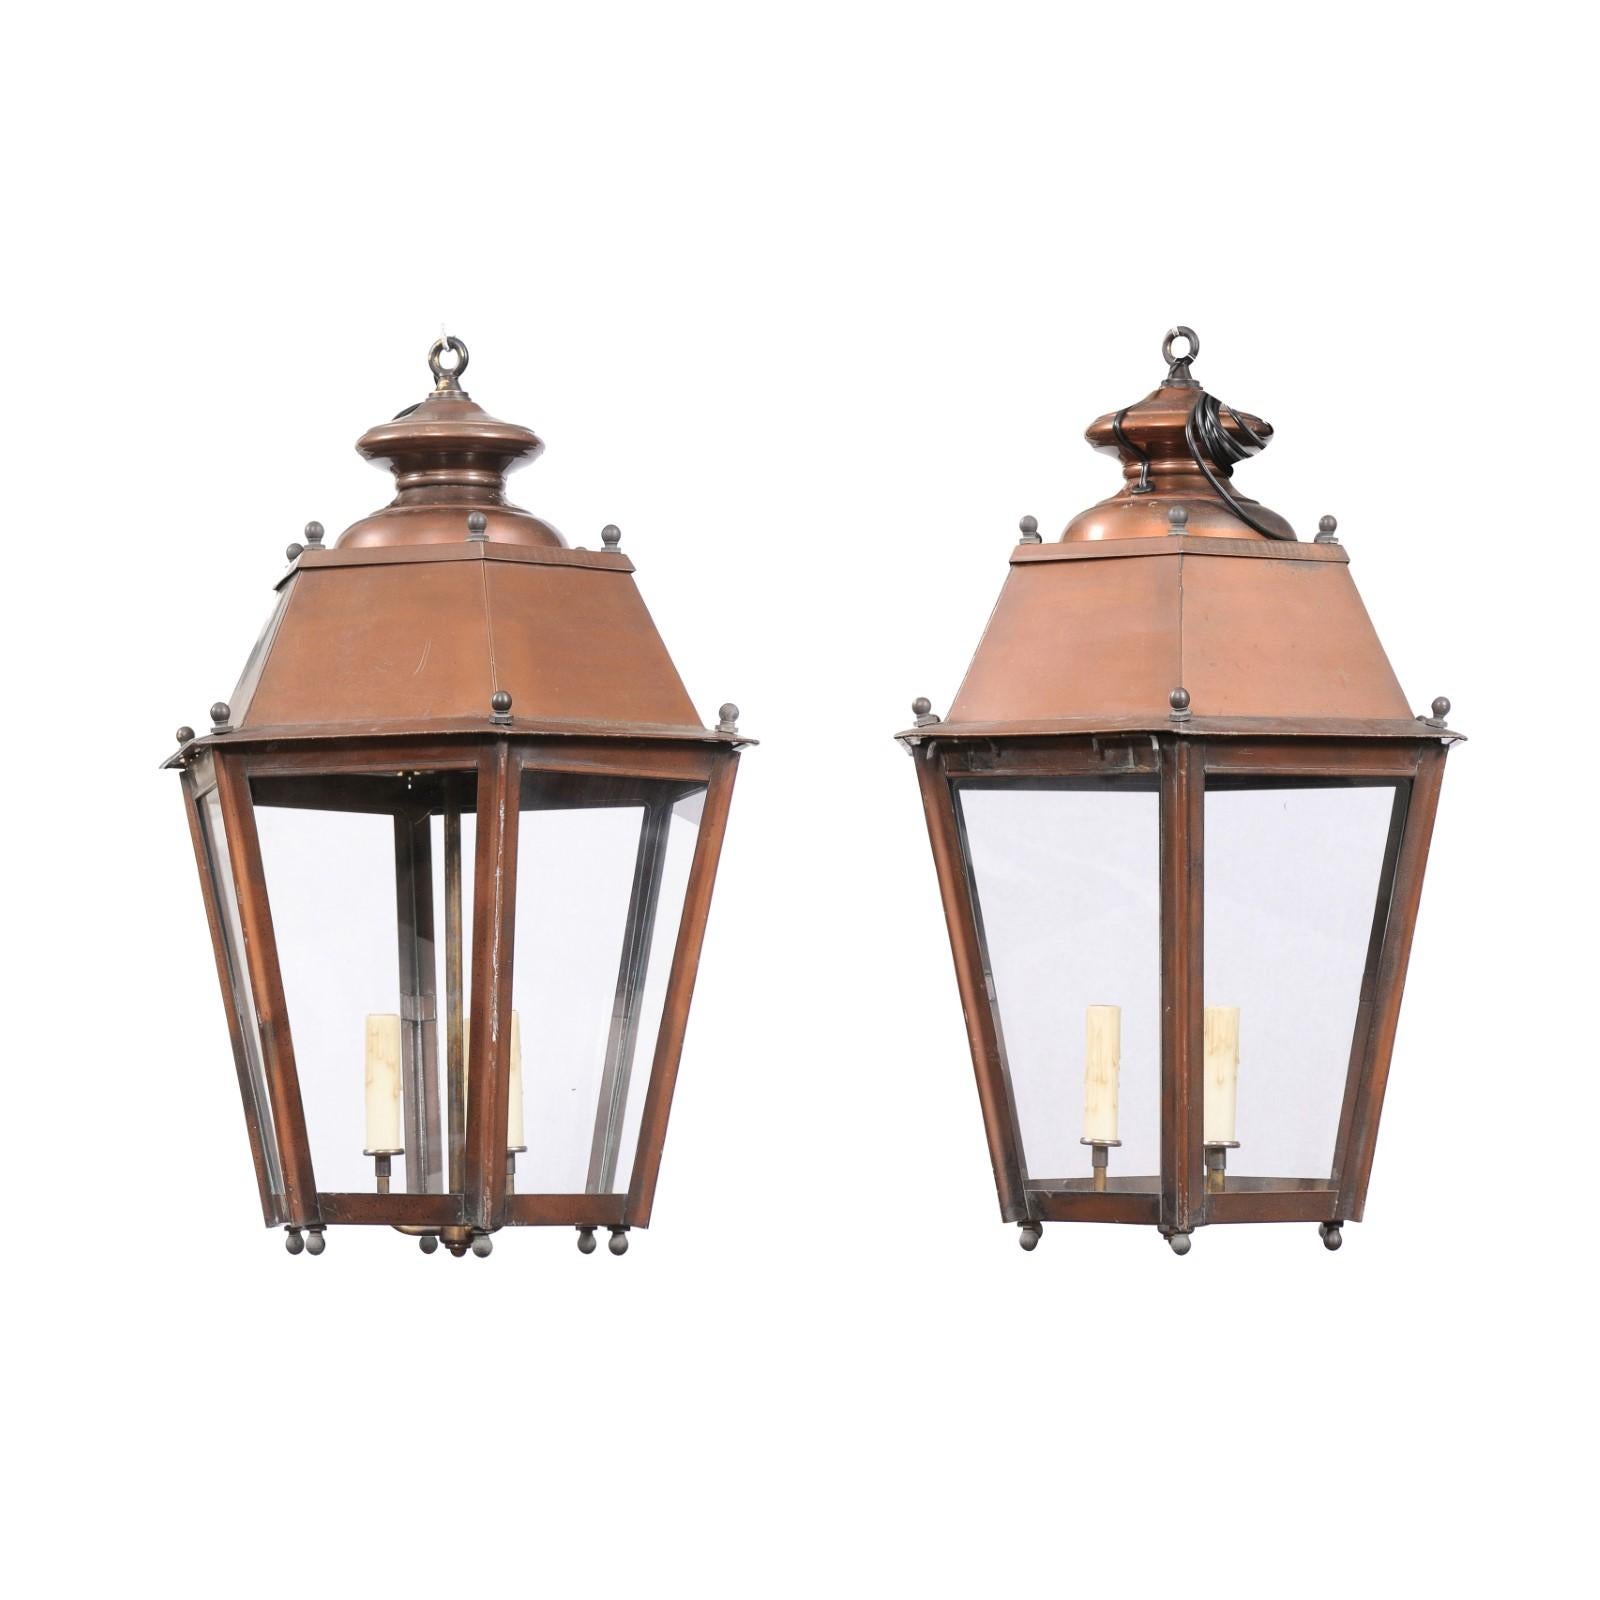 Pair of French Copper Three-Light Hexagonal Lanterns with Glass Panels, US Wired For Sale